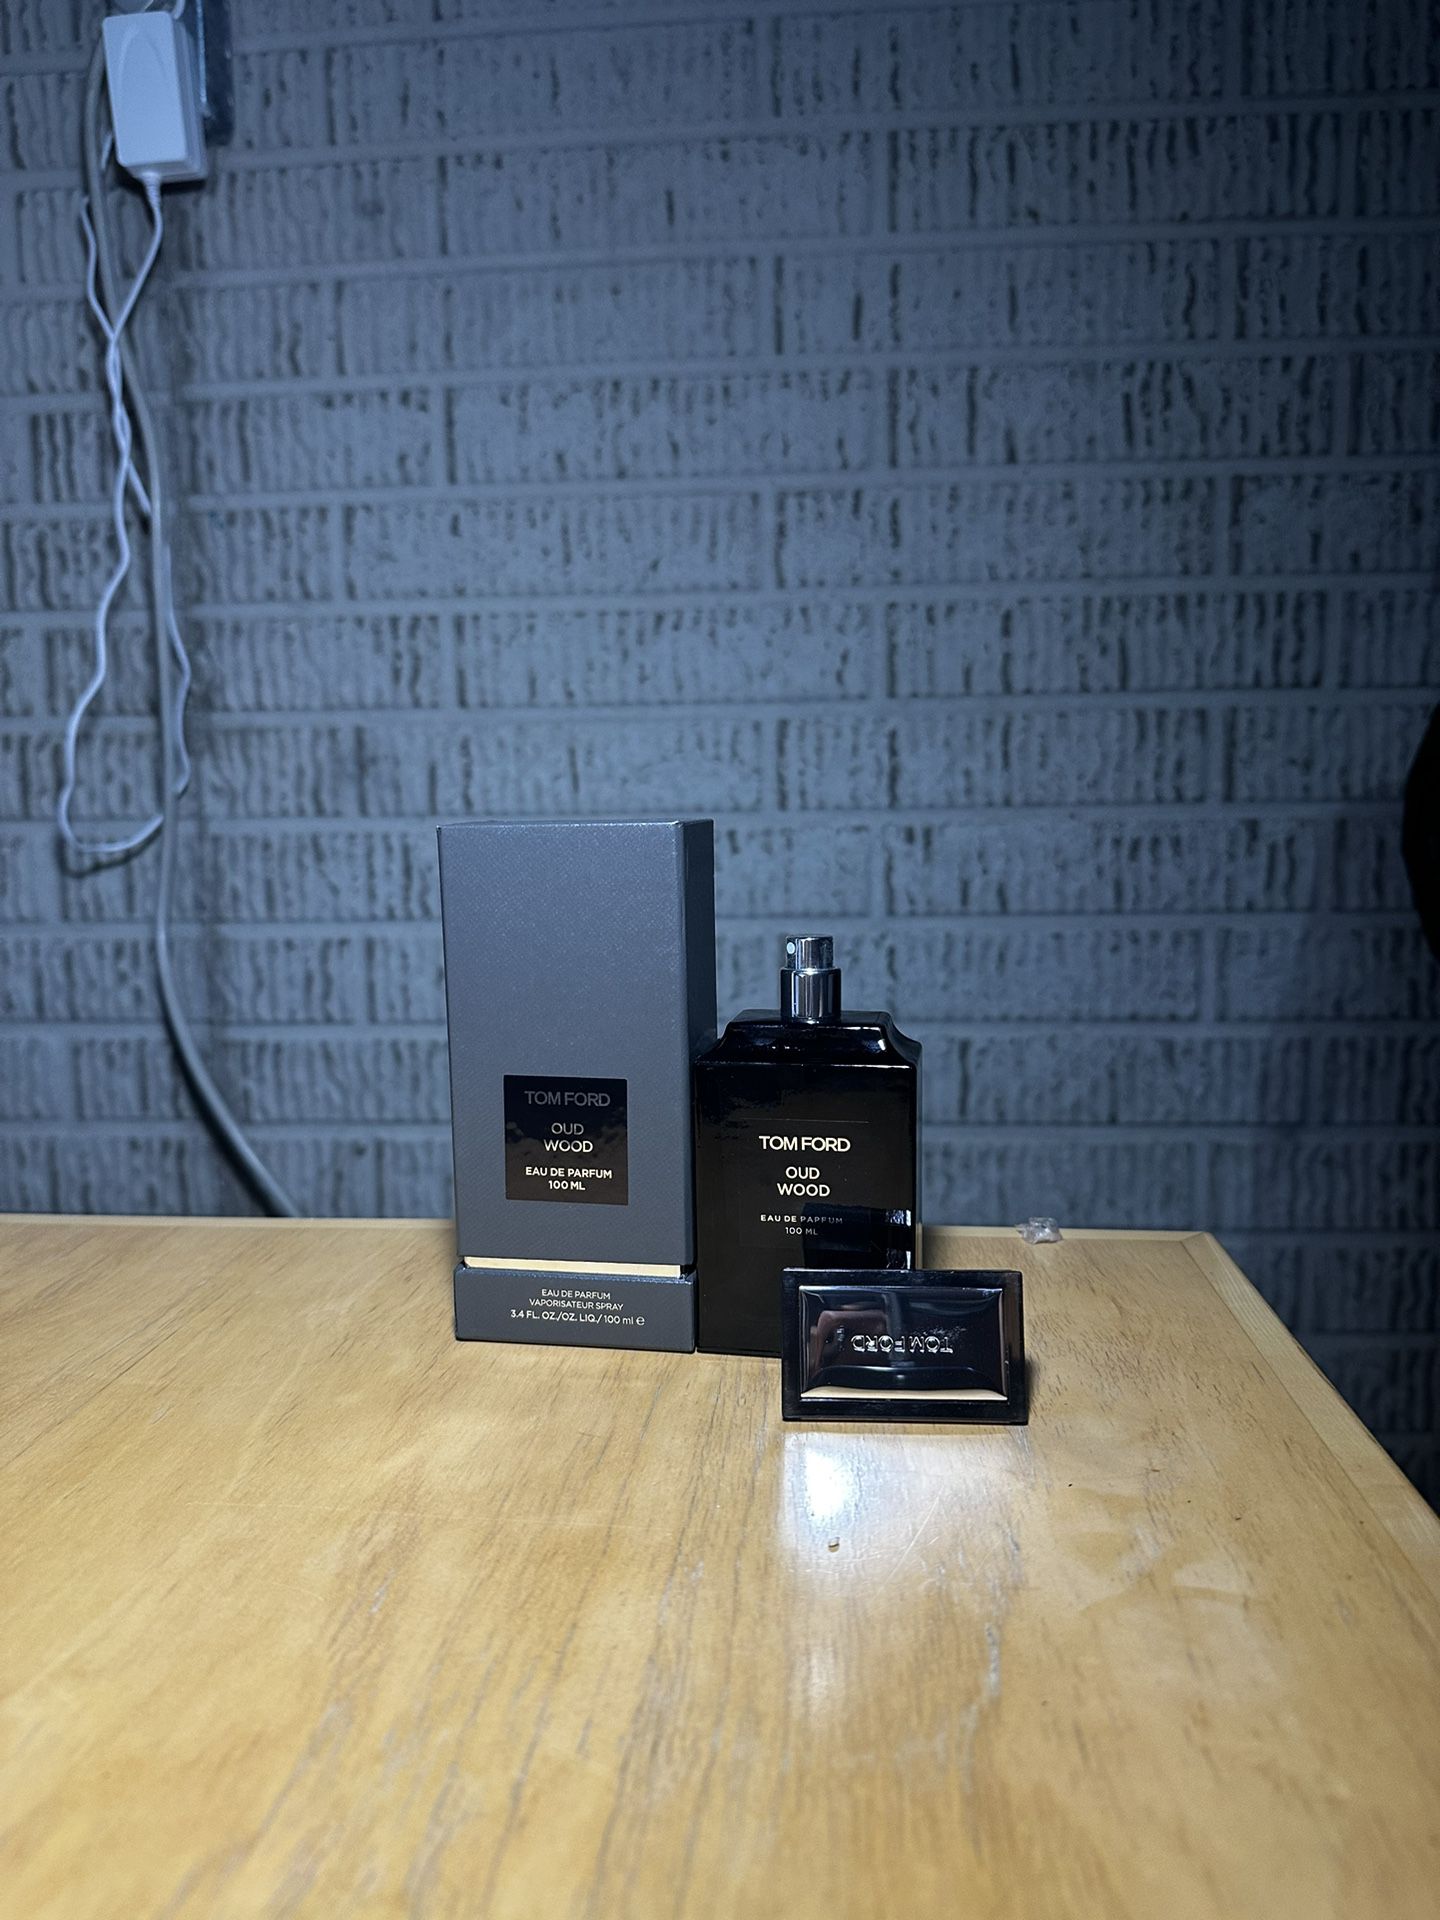 Tom Ford Oud Wood 3.4oz 100mL Authentic